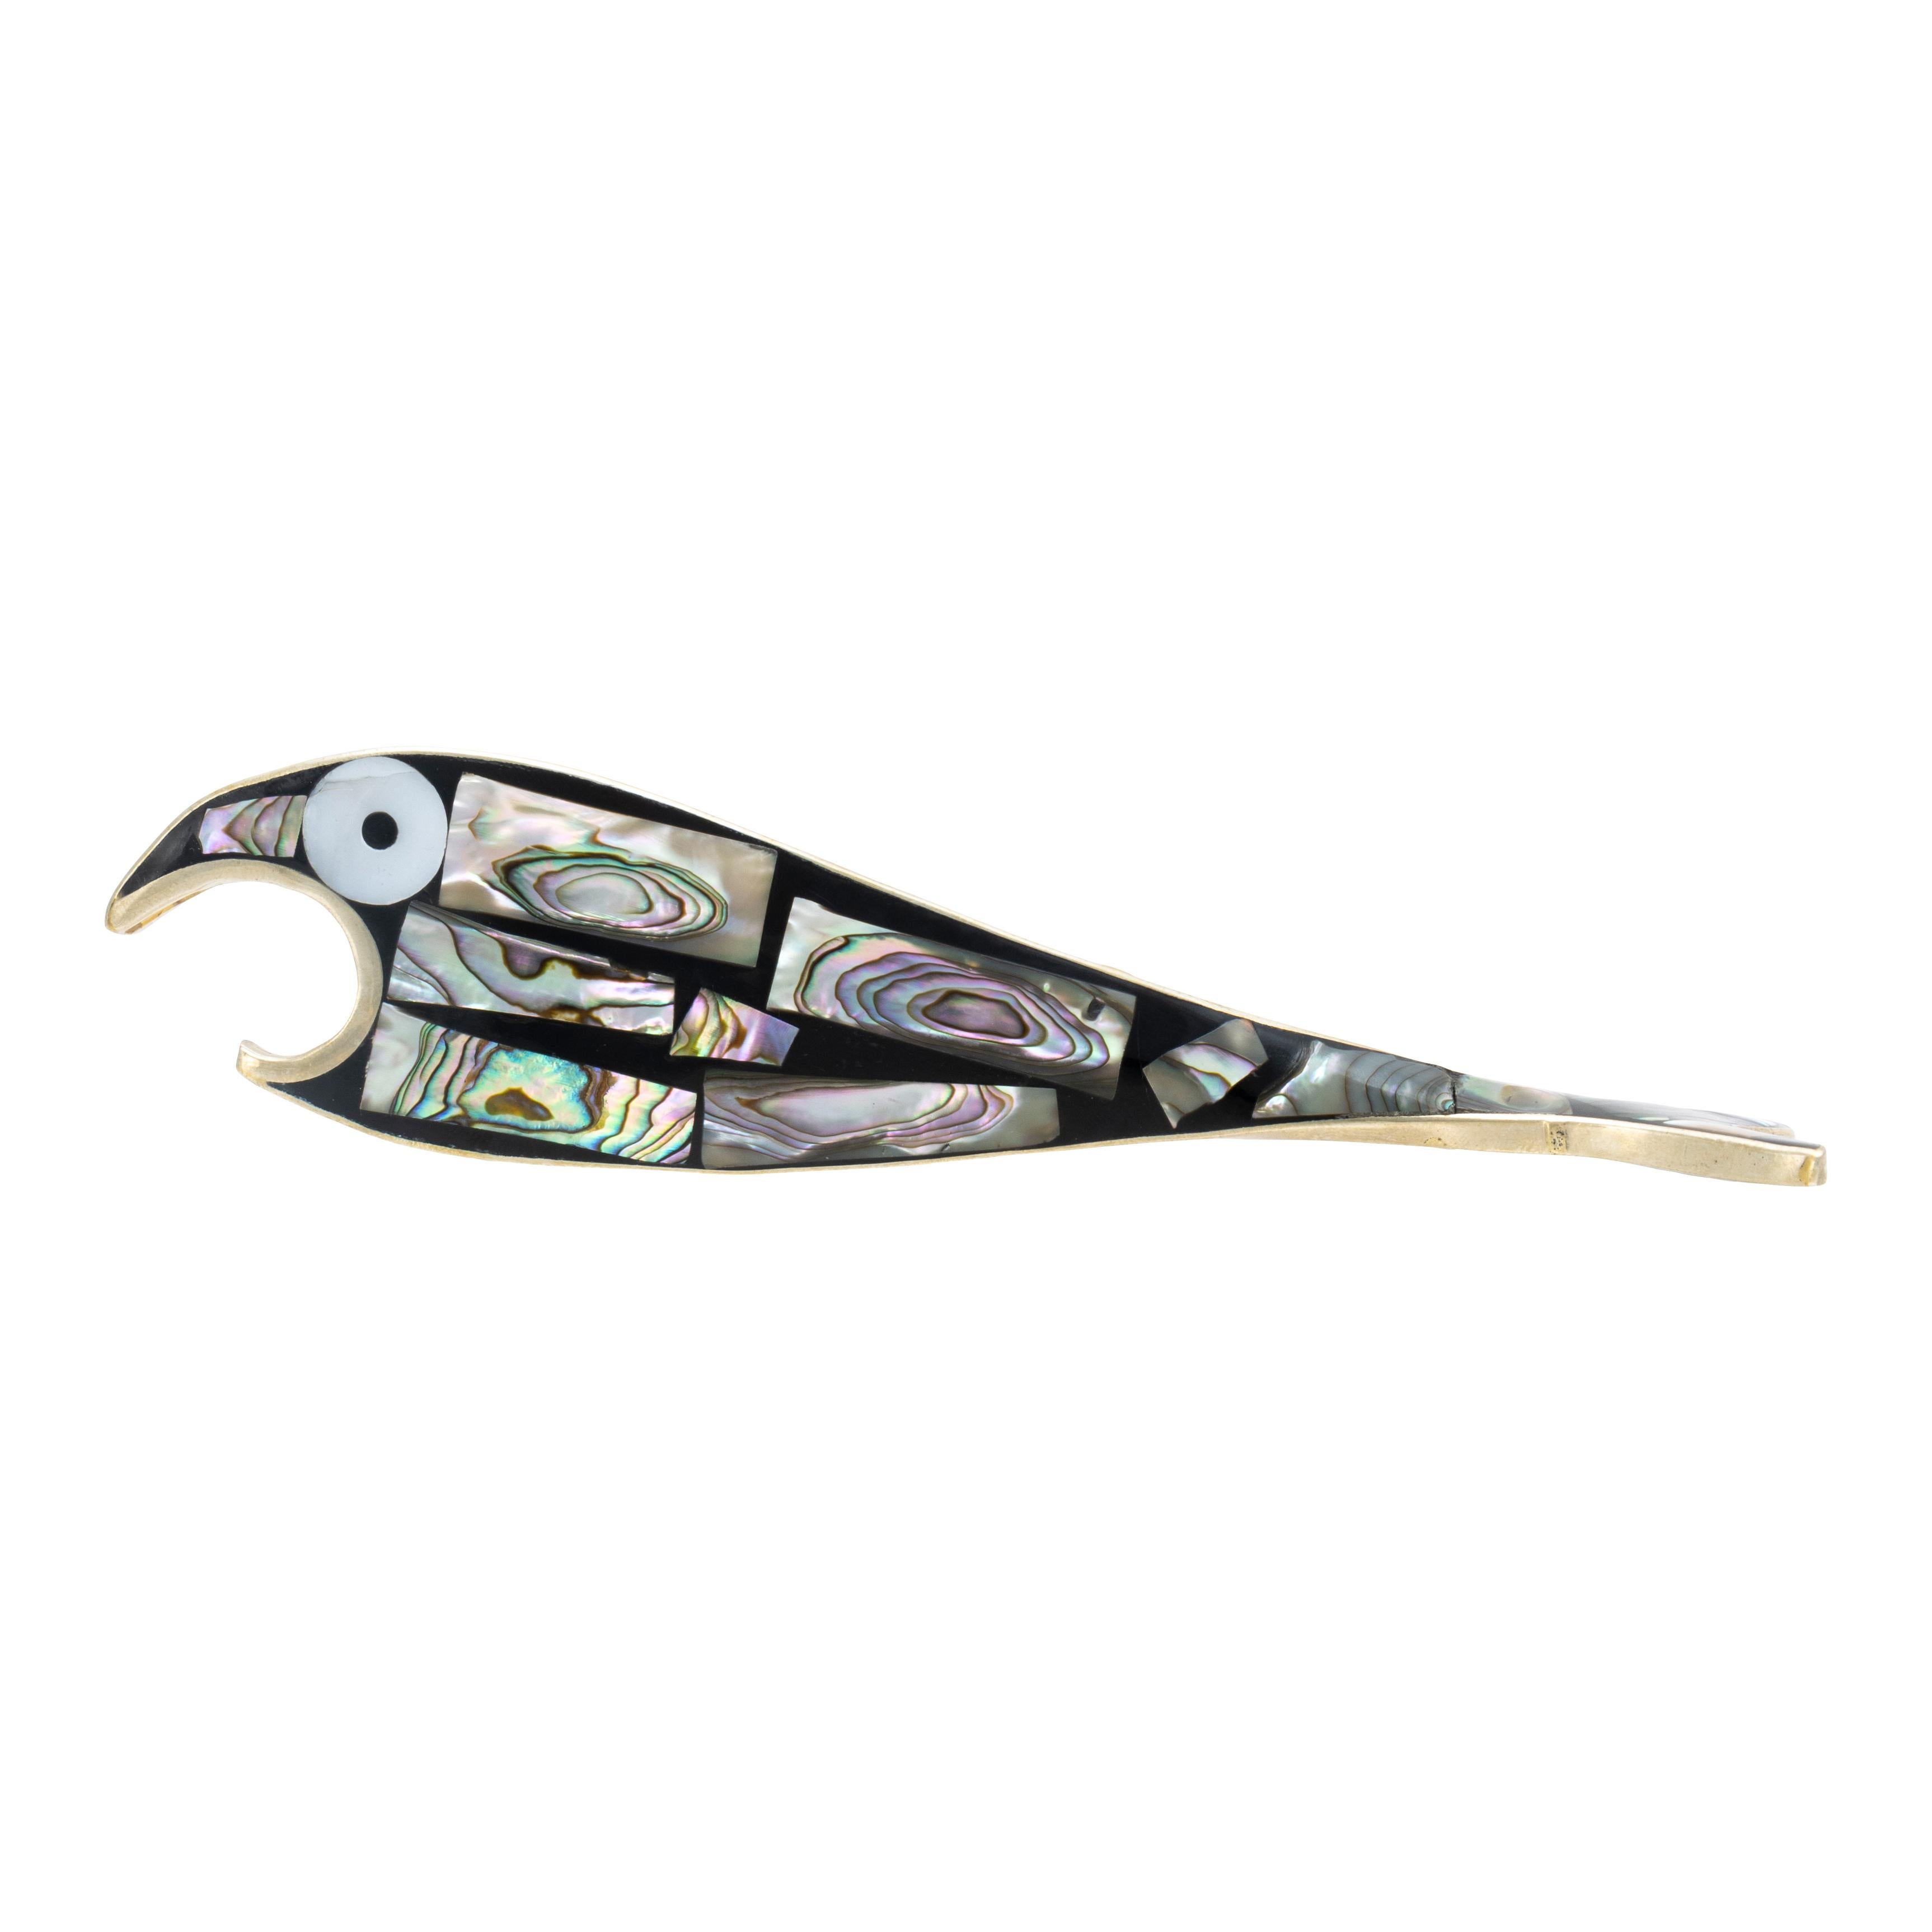 Alpaca silver fish bottle opener. Featuring Blue Pacific abalone inlay, contrasted nicely against the black backdrop of the piece and large white and black shell eyes. Its body is flat with curved open mouth that constitutes the bottle opener. Body